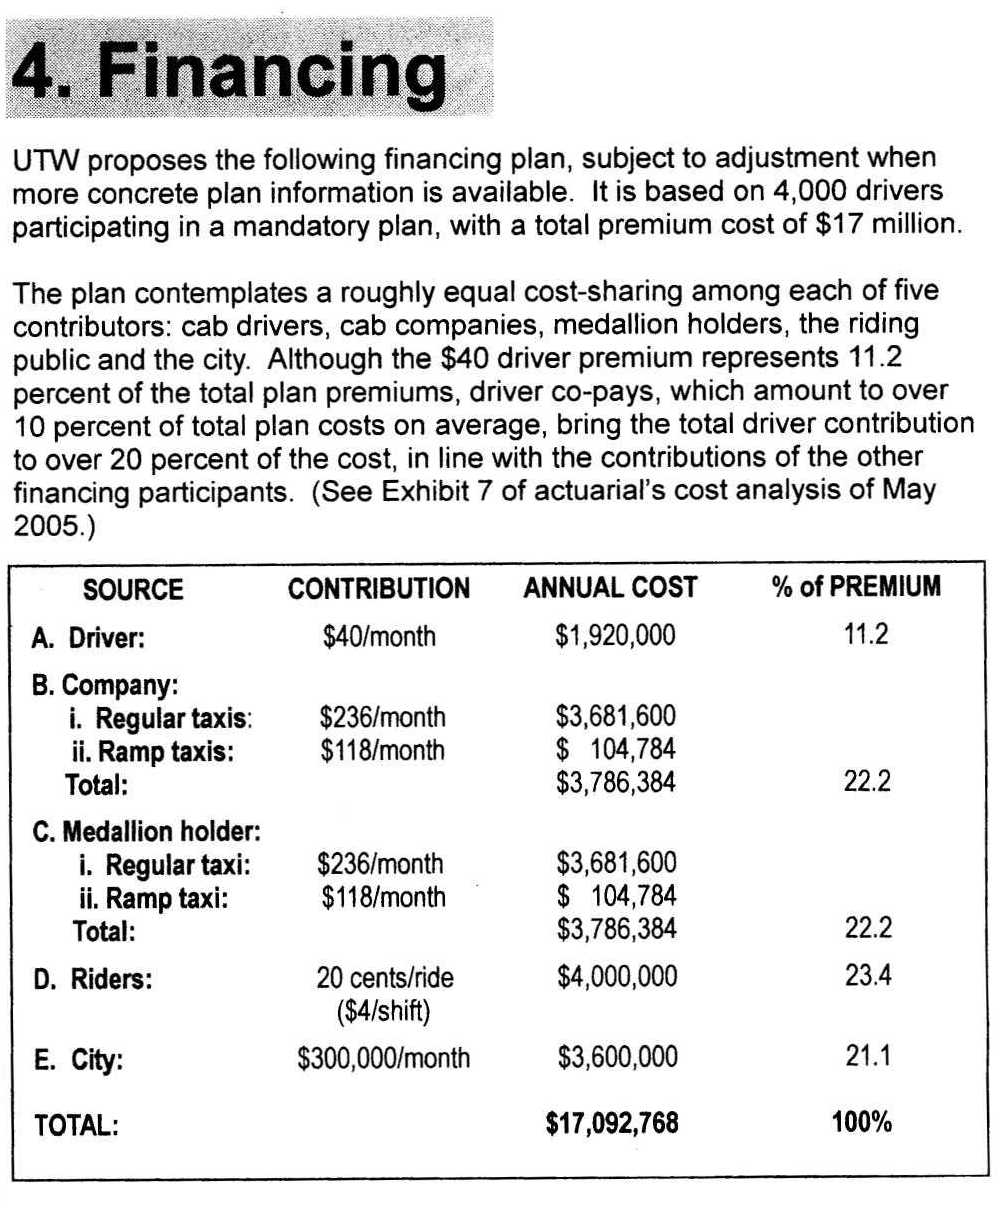 Page 3 of UTW document on Health Care, December 2006